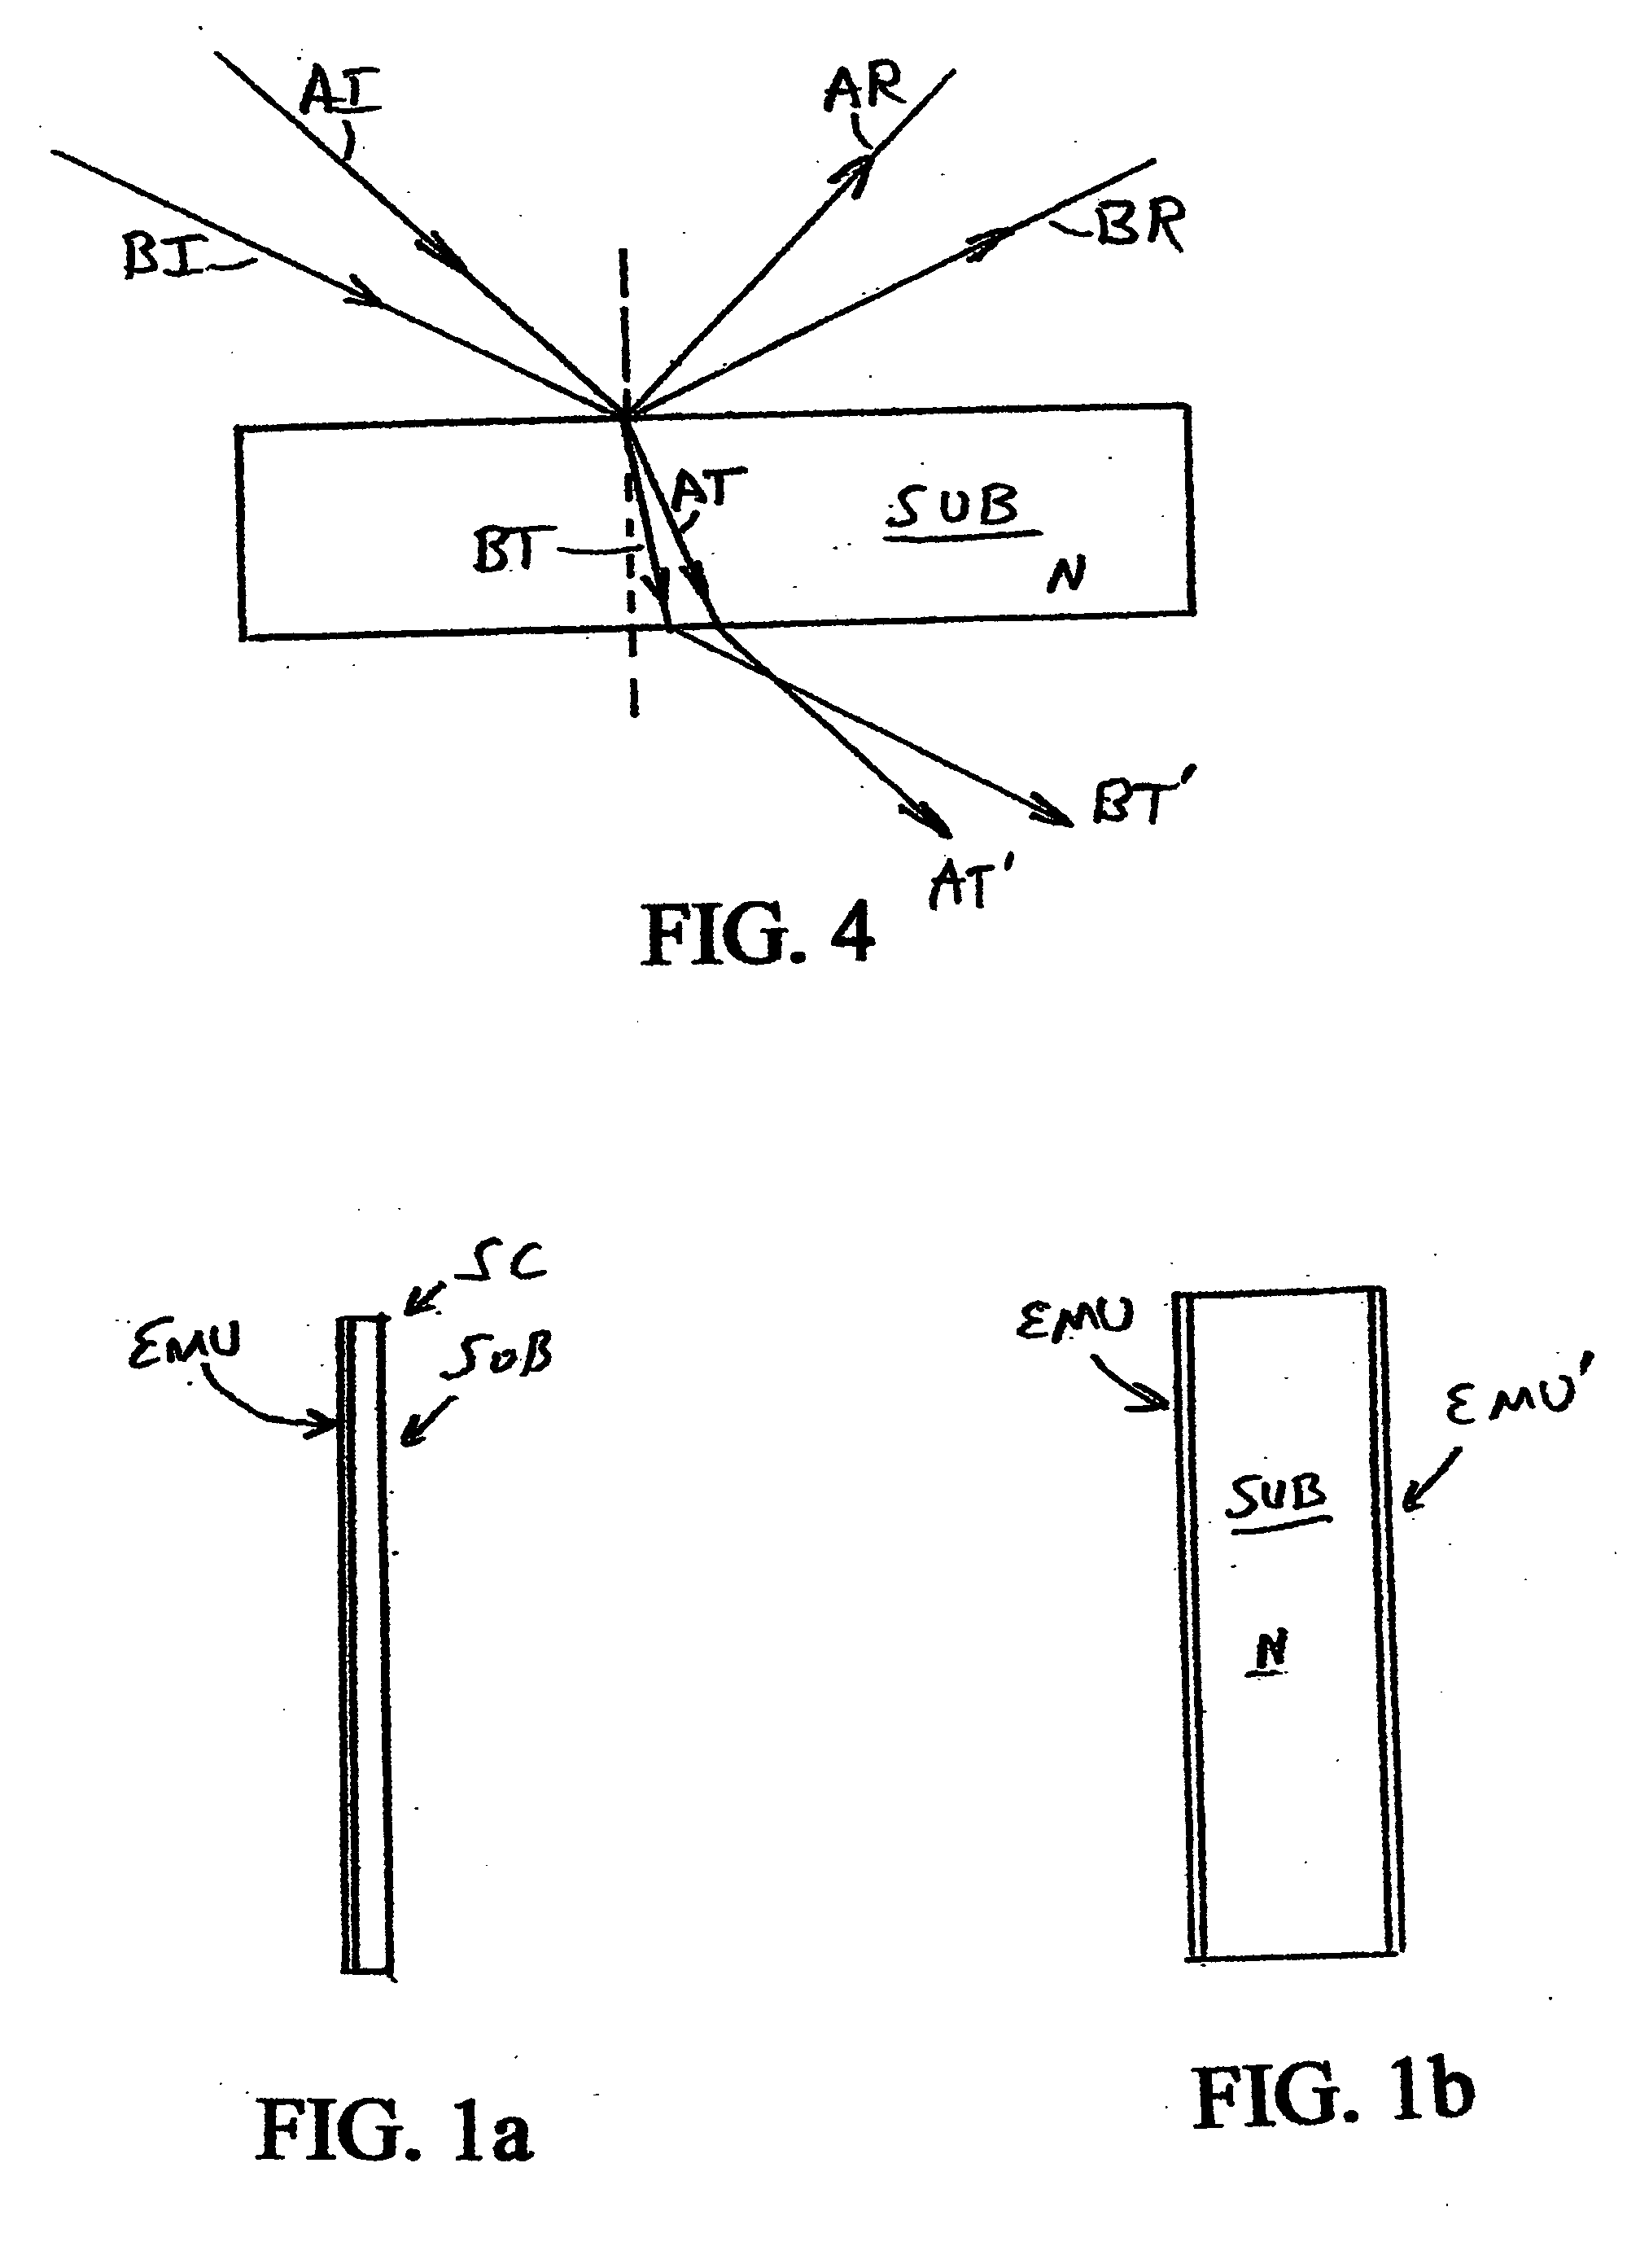 System and method for investigating photon or particle trajectory and interference pattern formation in double slit experiments